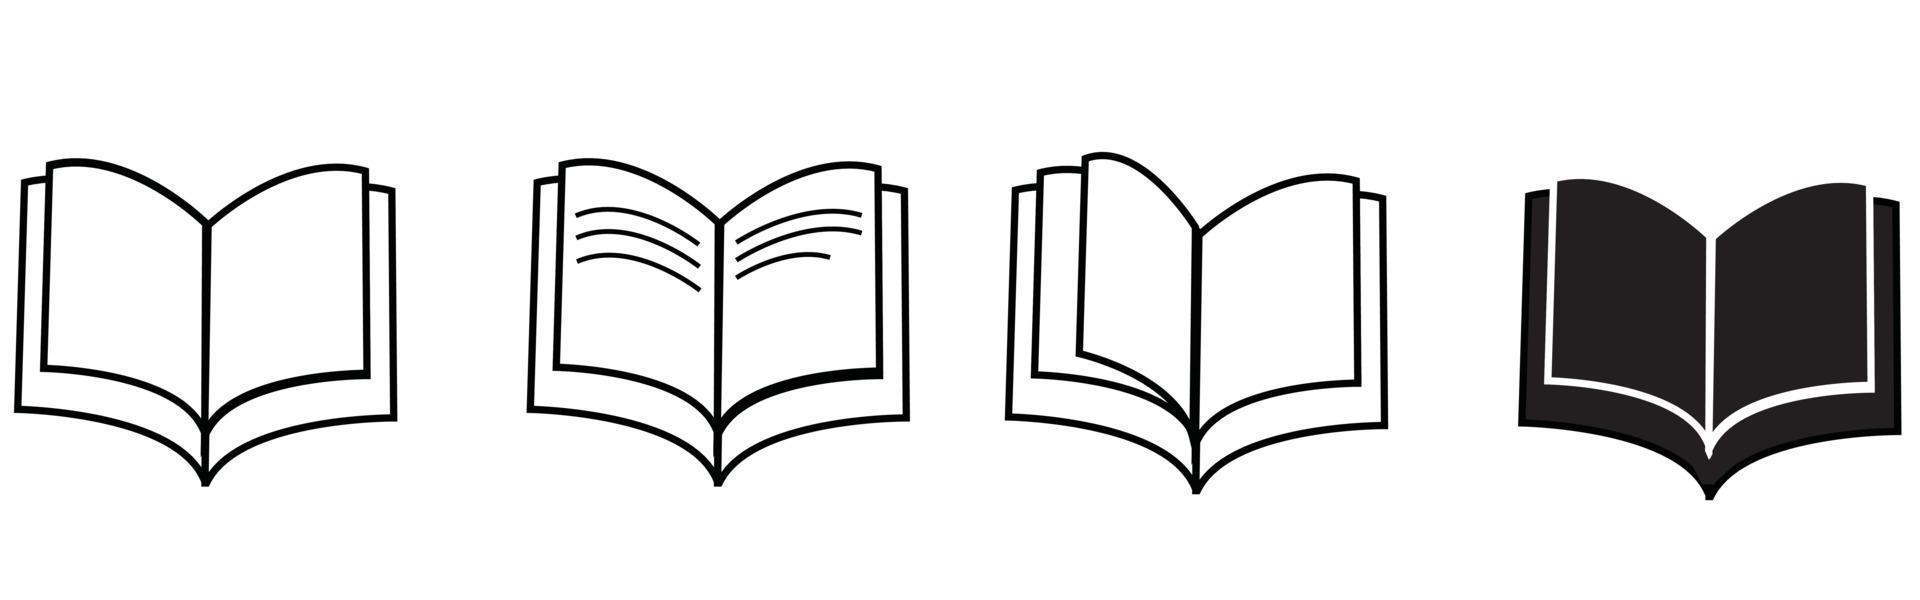 Books Icons. Vector